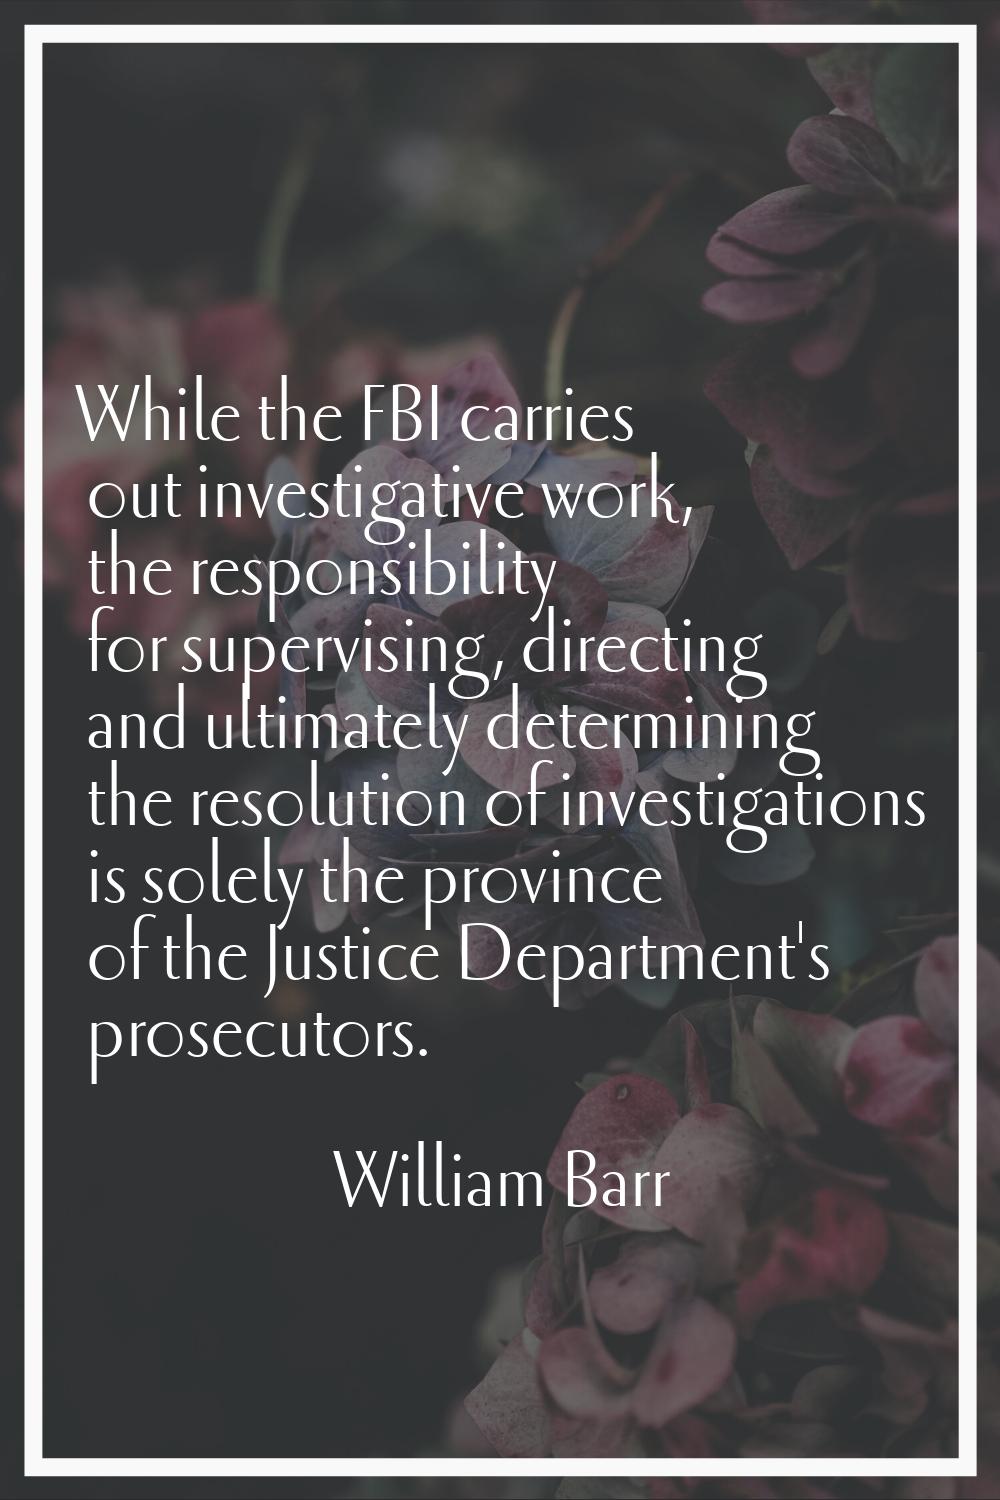 While the FBI carries out investigative work, the responsibility for supervising, directing and ult